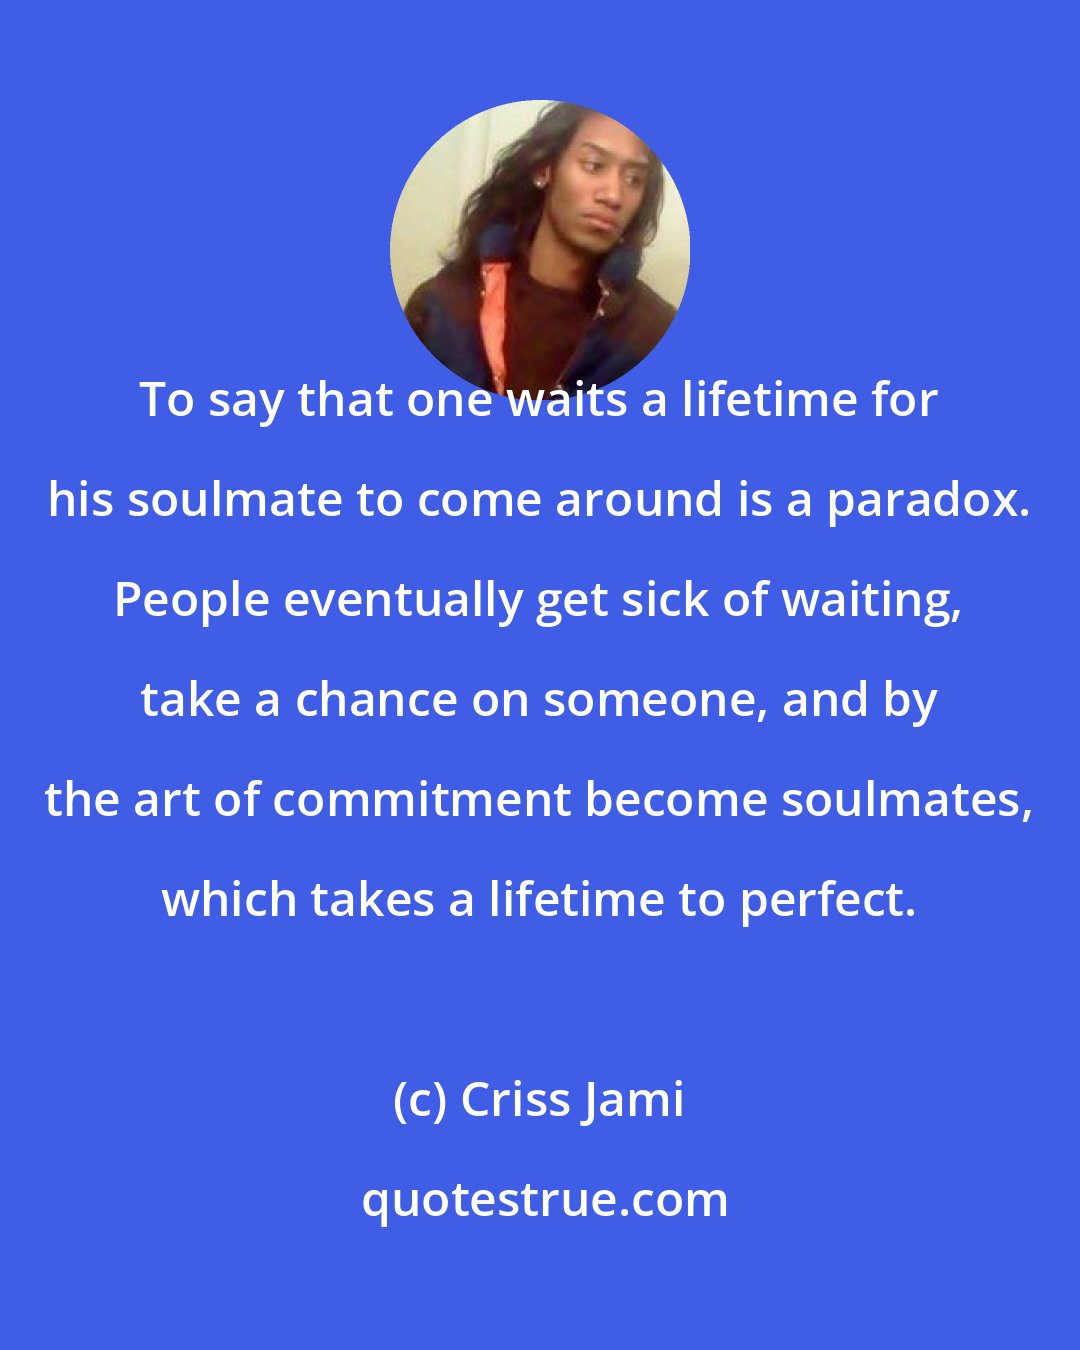 Criss Jami: To say that one waits a lifetime for his soulmate to come around is a paradox. People eventually get sick of waiting, take a chance on someone, and by the art of commitment become soulmates, which takes a lifetime to perfect.